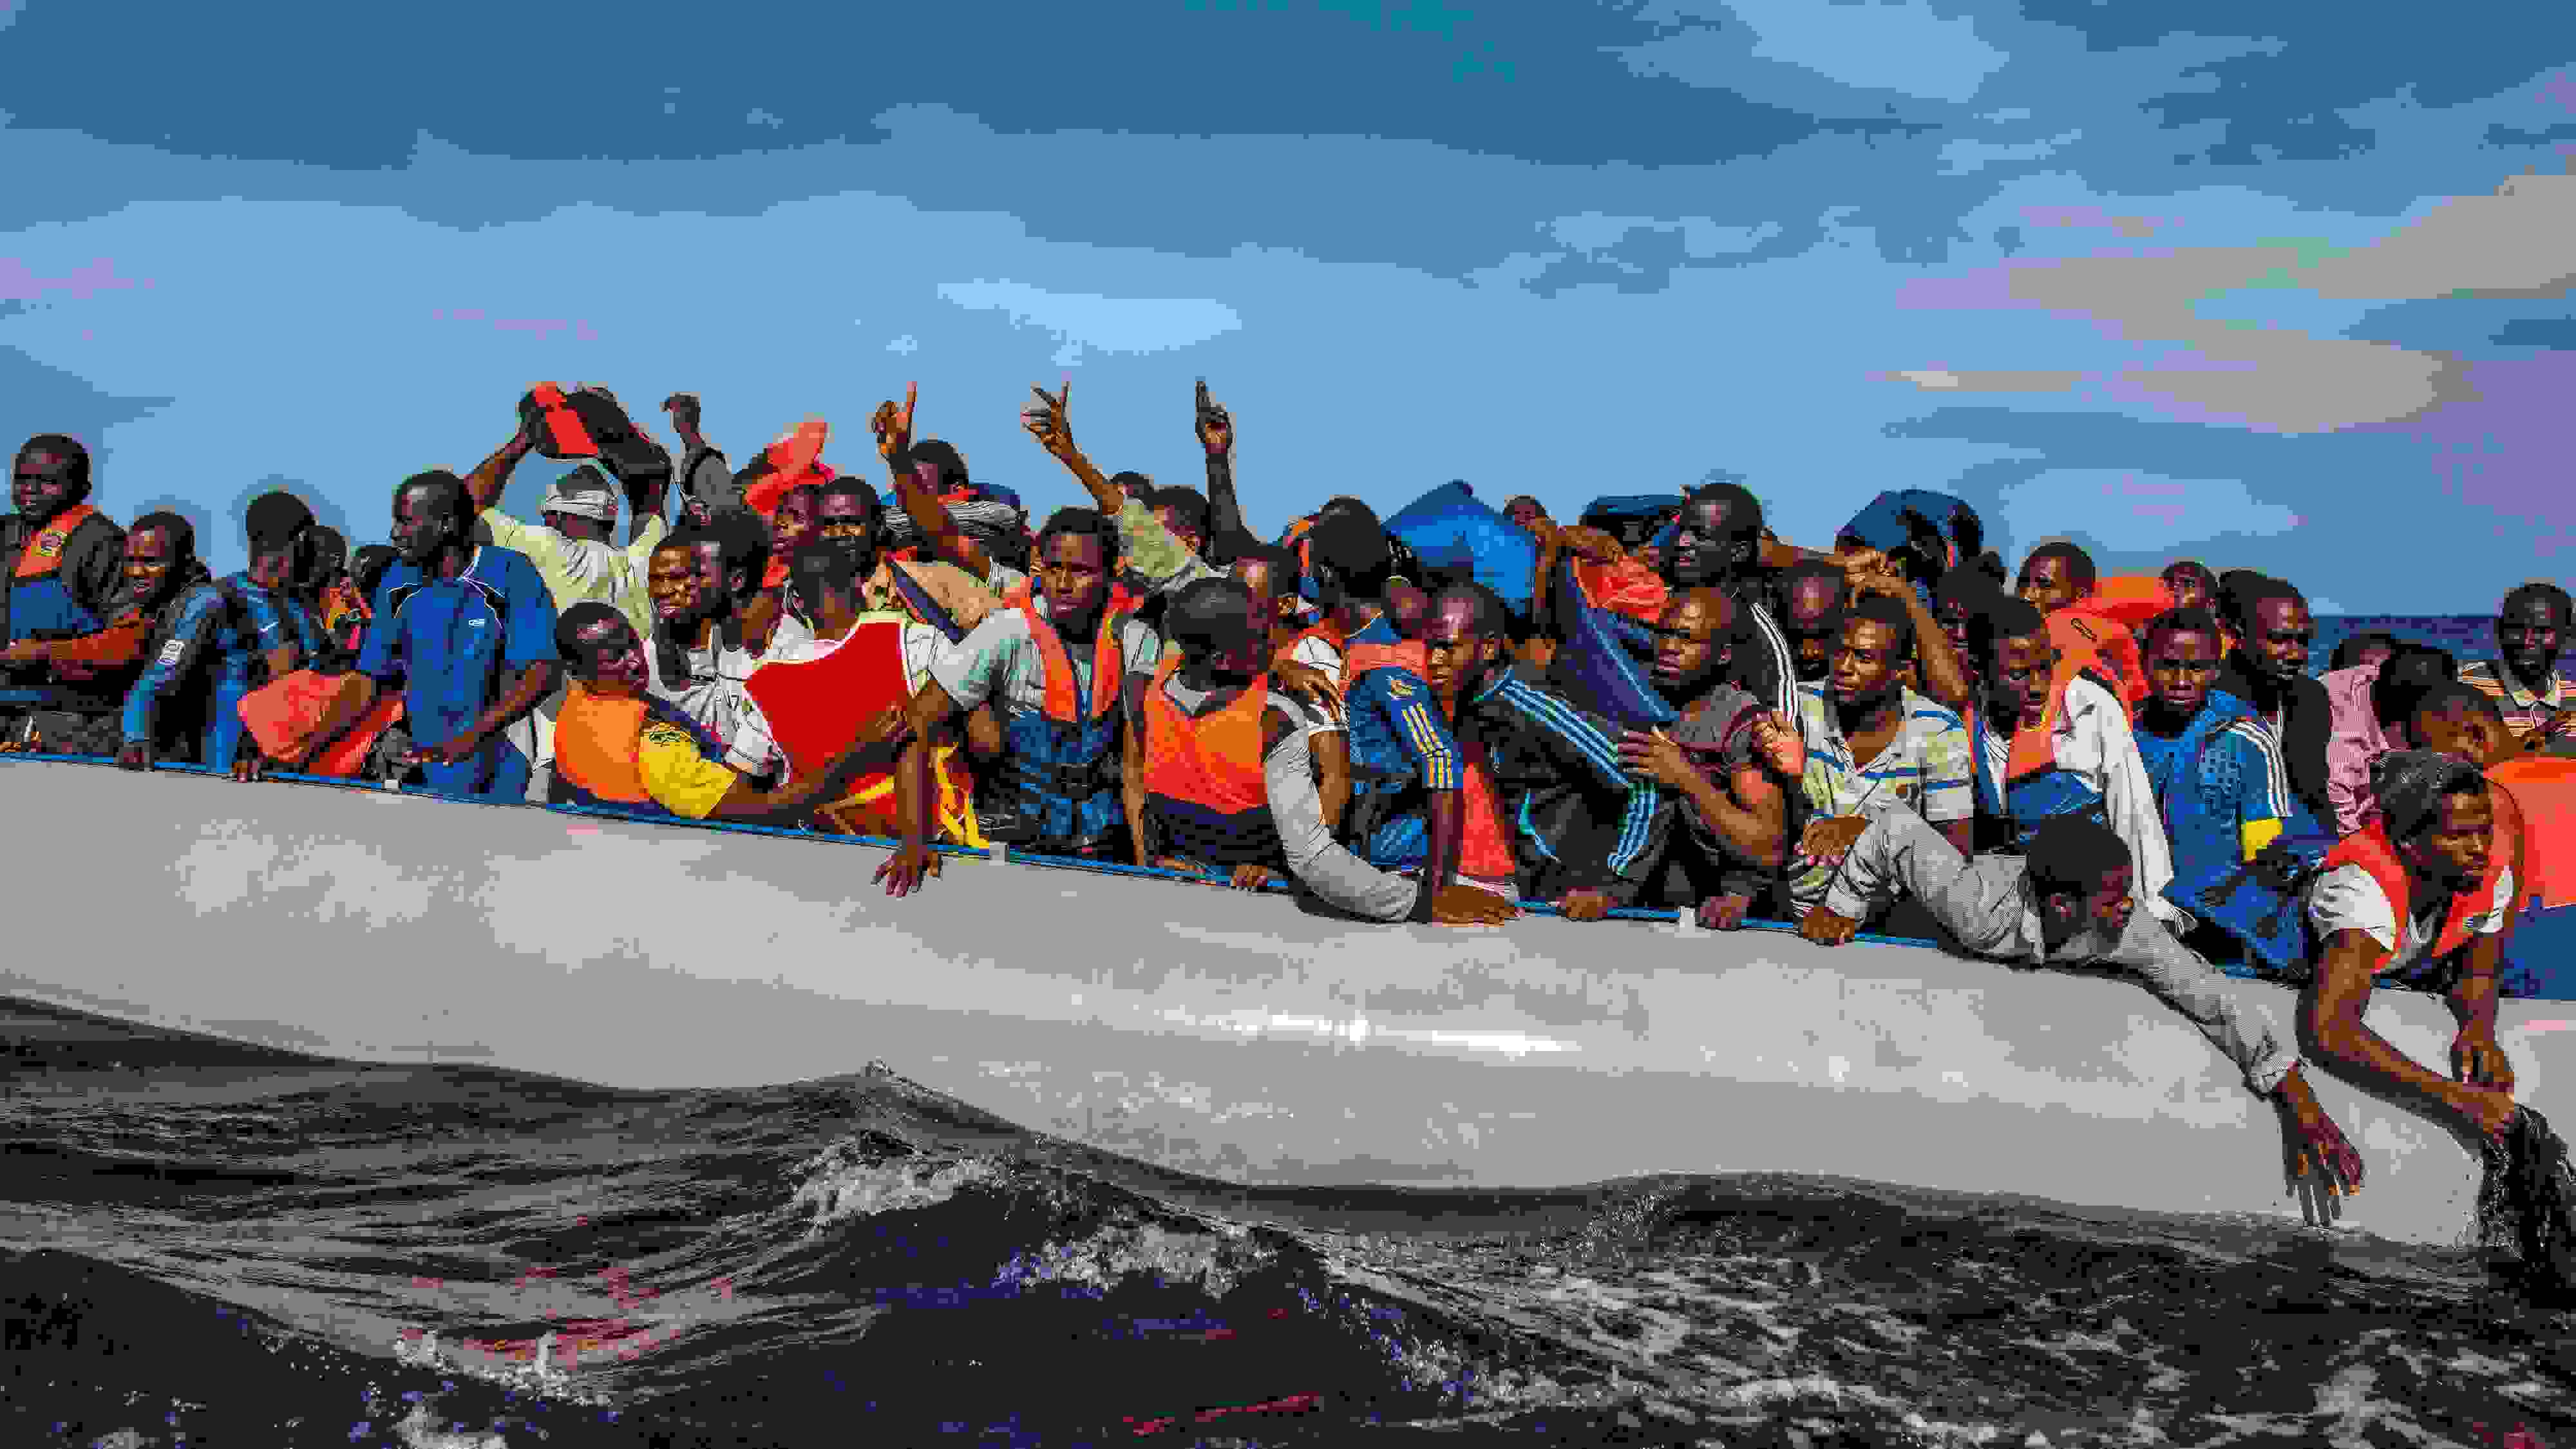 One hundred and nine African refugees from Gambia, Mali, Senegal, Ivory Coast, Guinea, and Nigeria are rescued by the Italian navy from a rubber boat in the sea between Italy and Libya, October 2014.